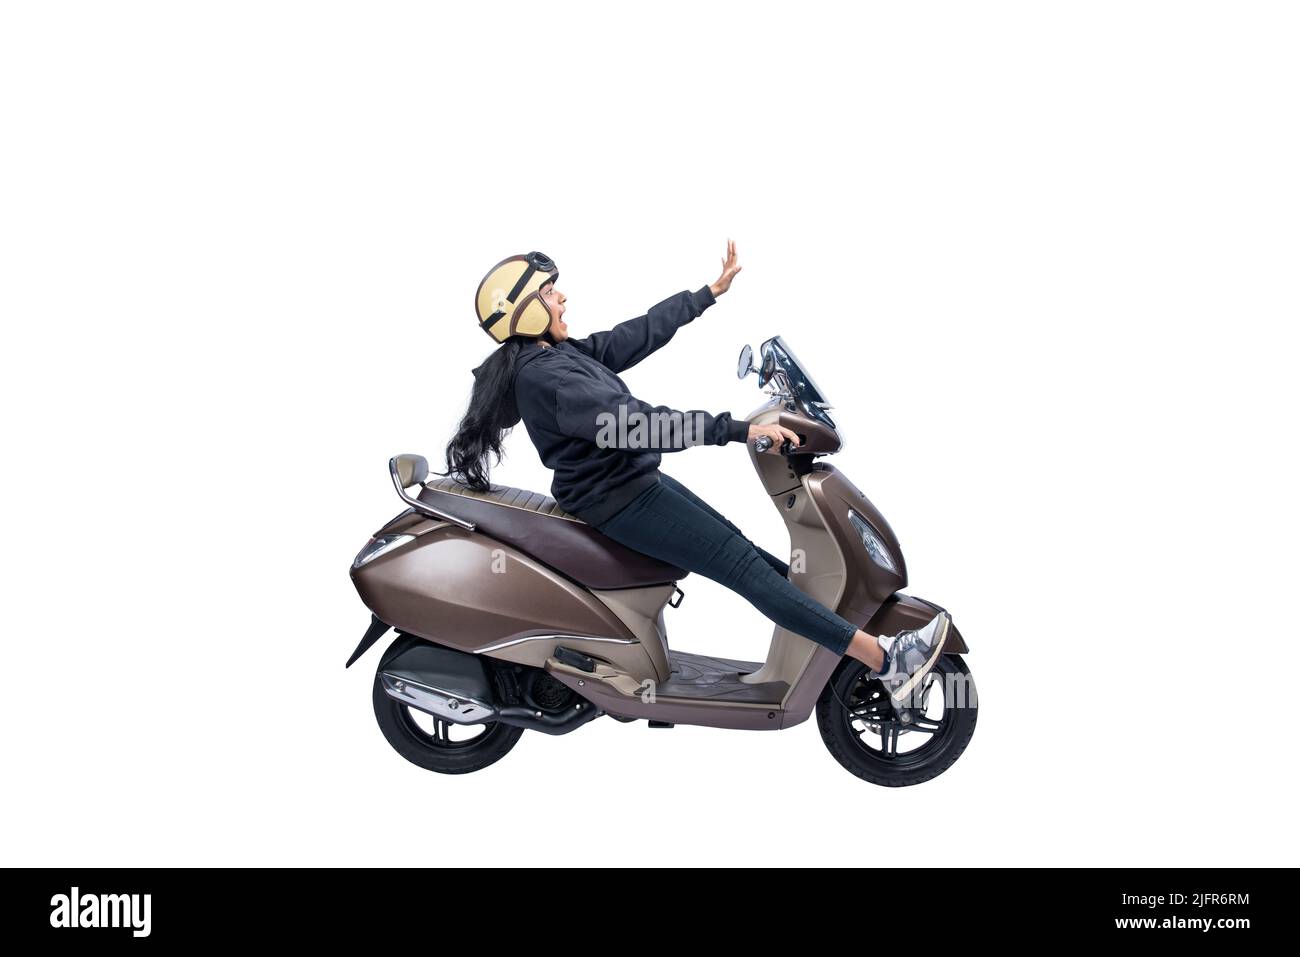 Asian woman with a helmet and jacket sitting on a scooter isolated over white background Stock Photo